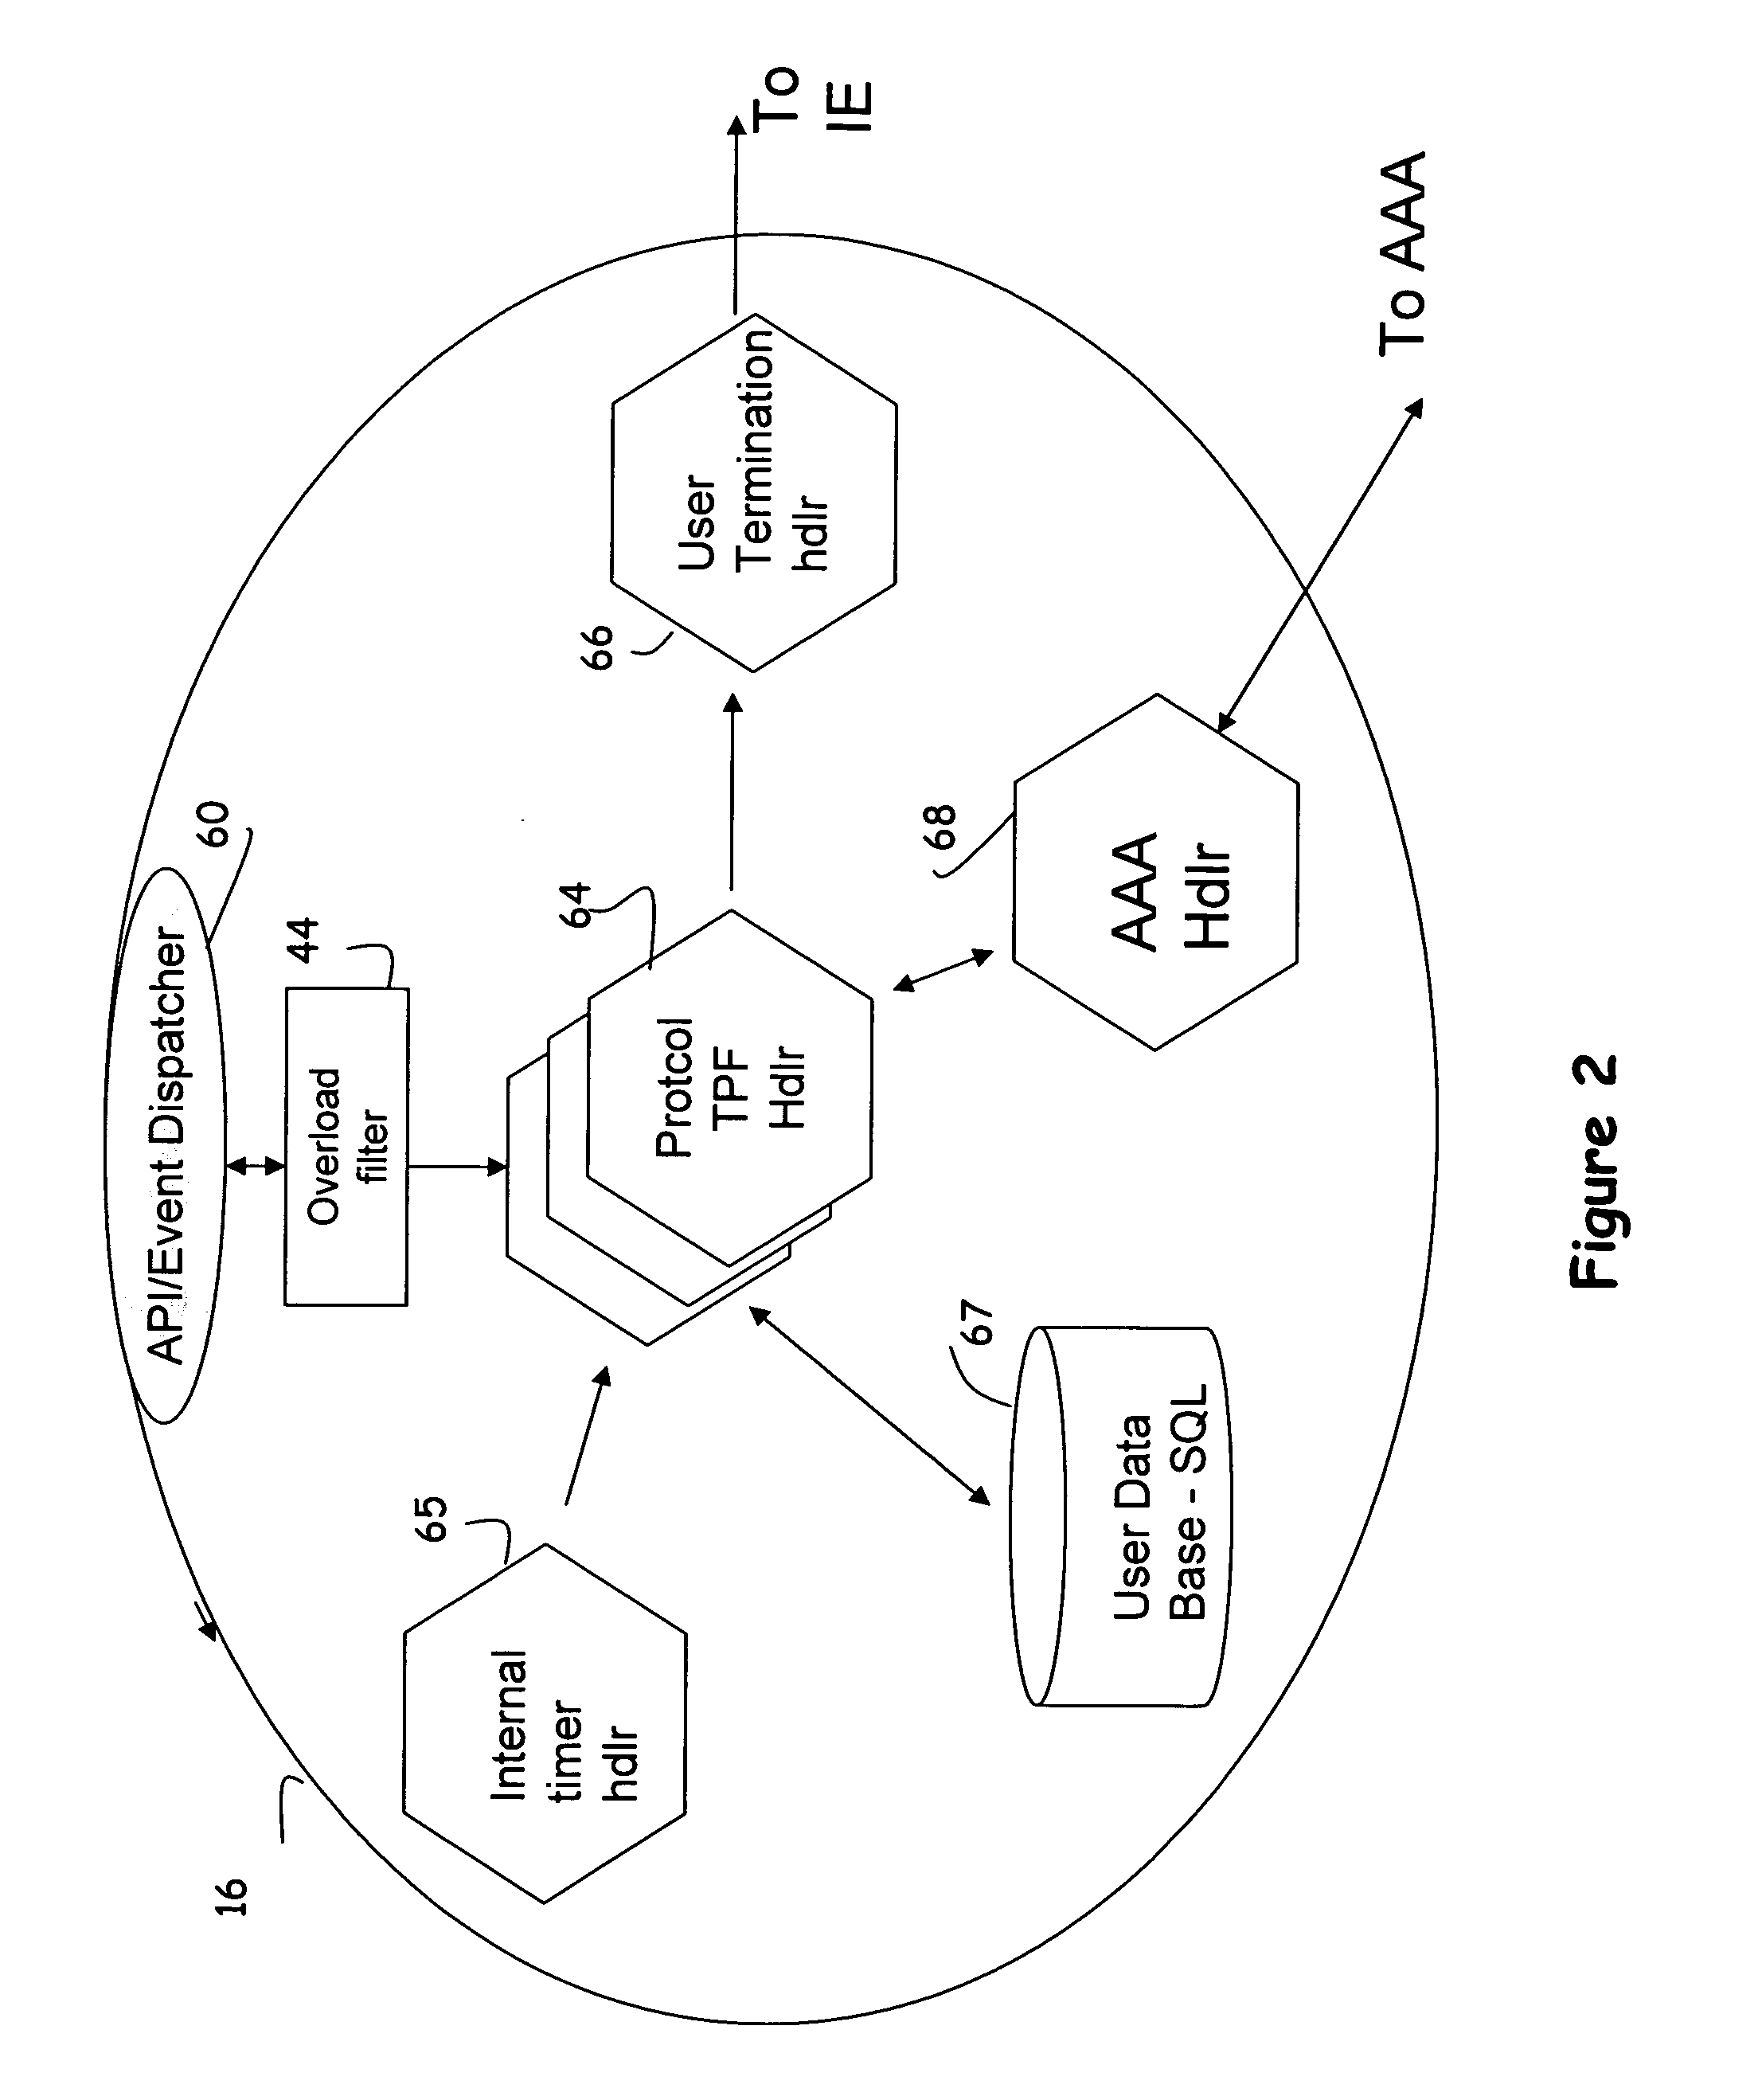 System for managing sessions and connections in a network